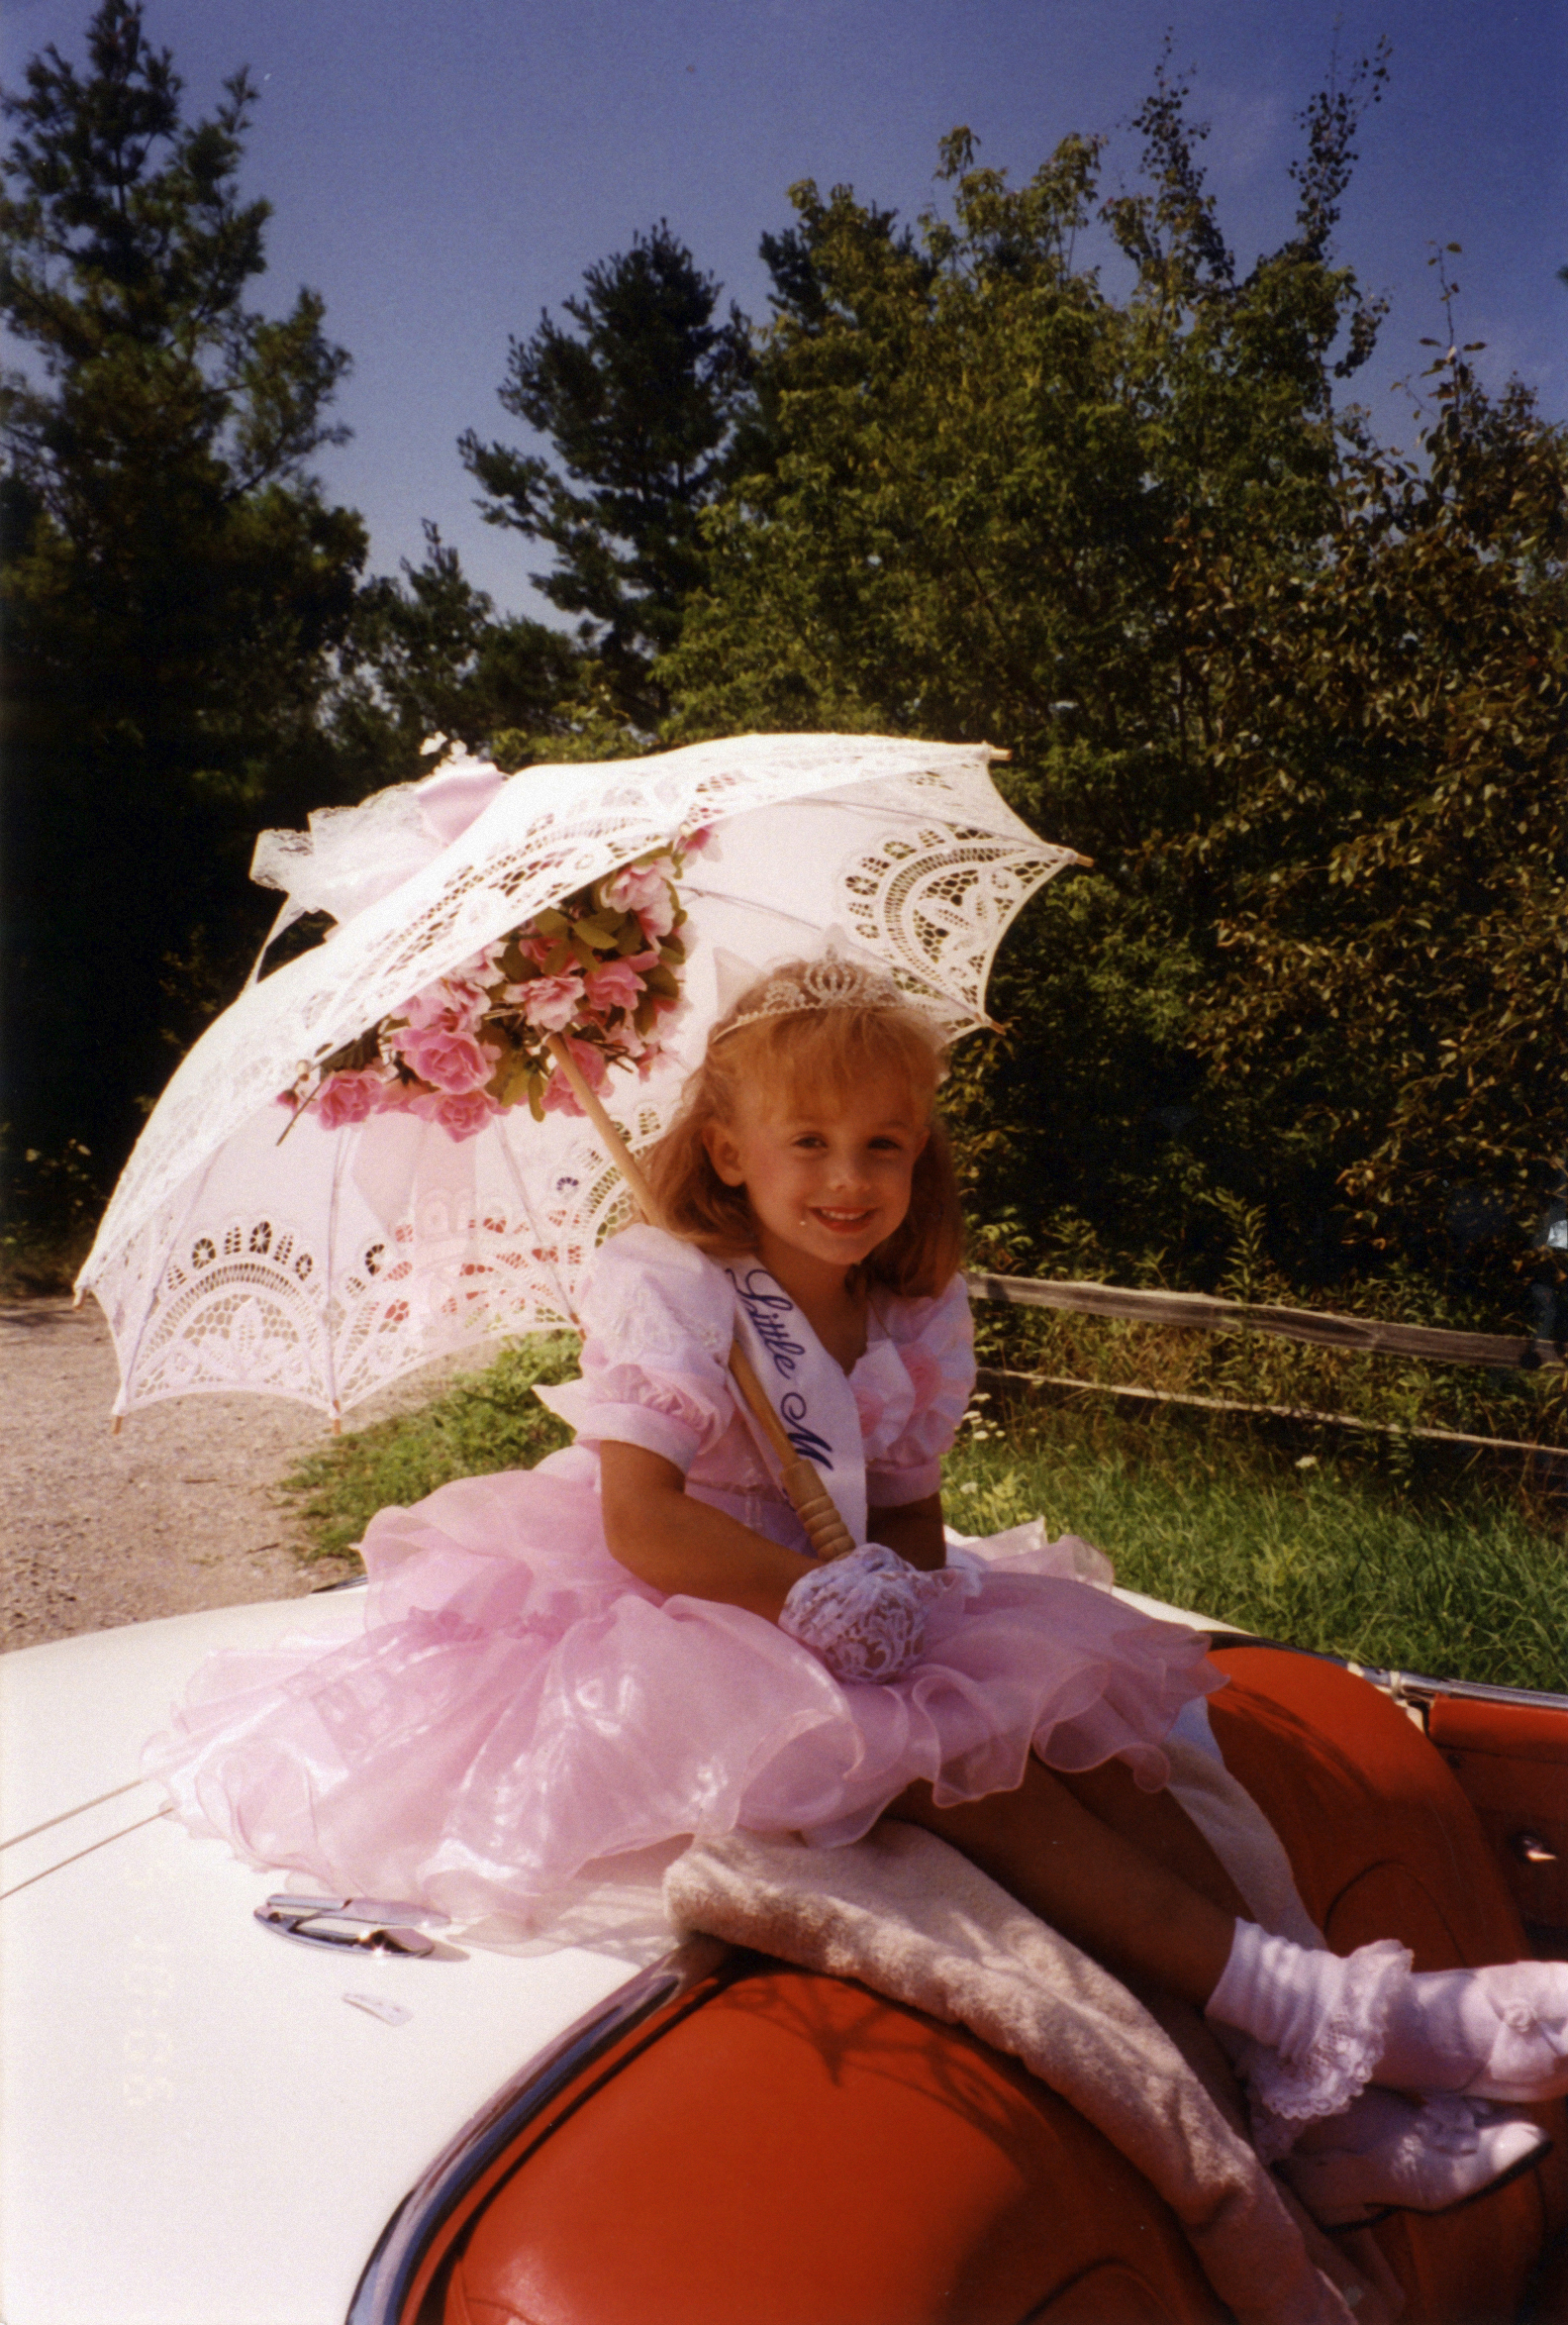 PHOTO: JonBenet Ramsey is pictured here in an undated photo riding on the back of a car for a local parade. She was found killed at age 6 in the family's basement in 1996.